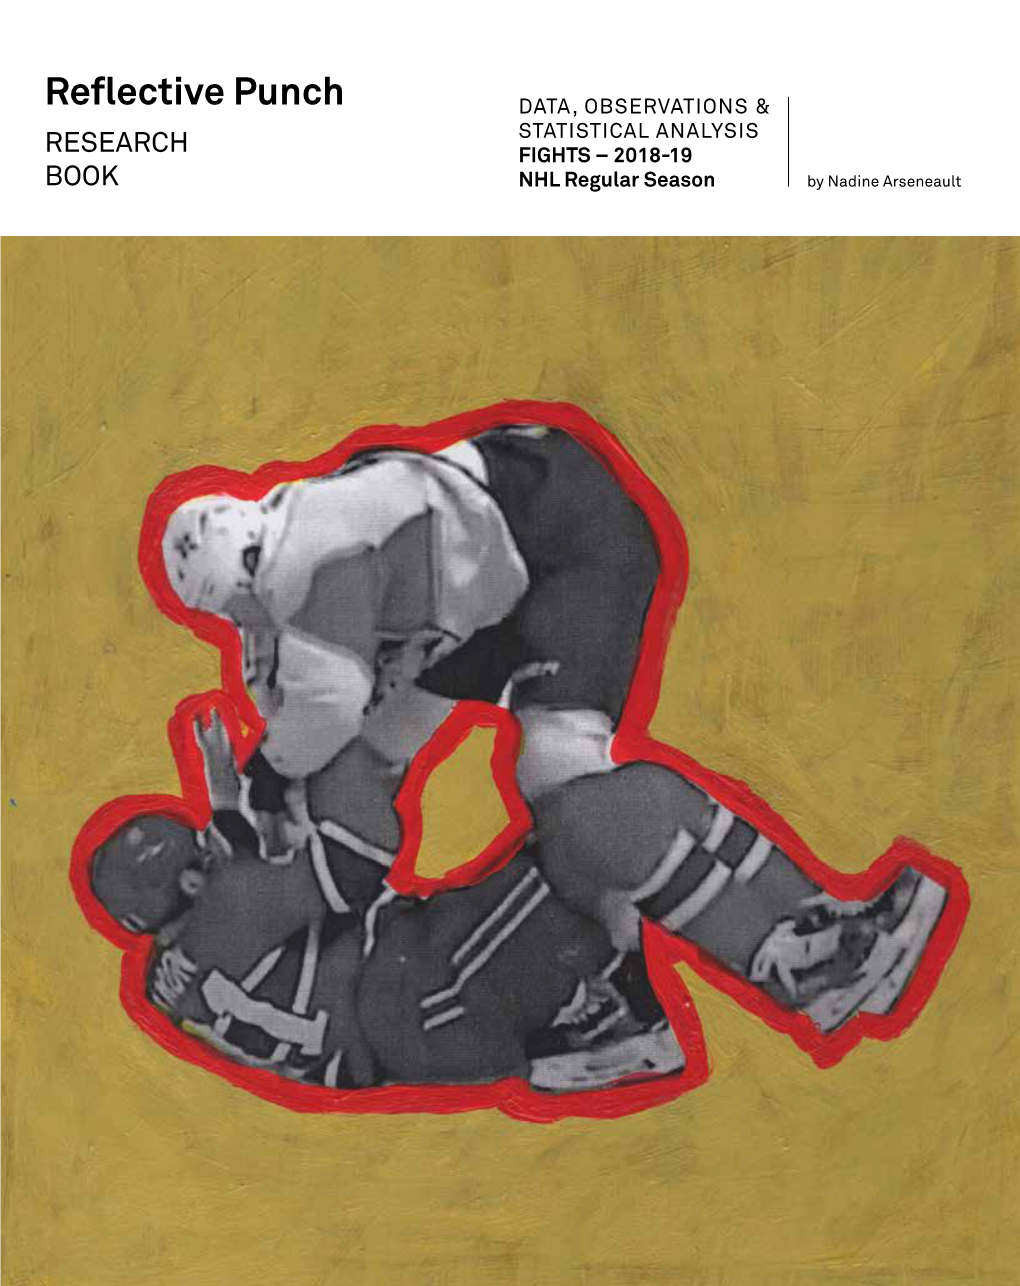 Reflective Punch DATA, OBSERVATIONS & STATISTICAL ANALYSIS RESEARCH FIGHTS – 2018-19 BOOK NHL Regular Season by Nadine Arseneault